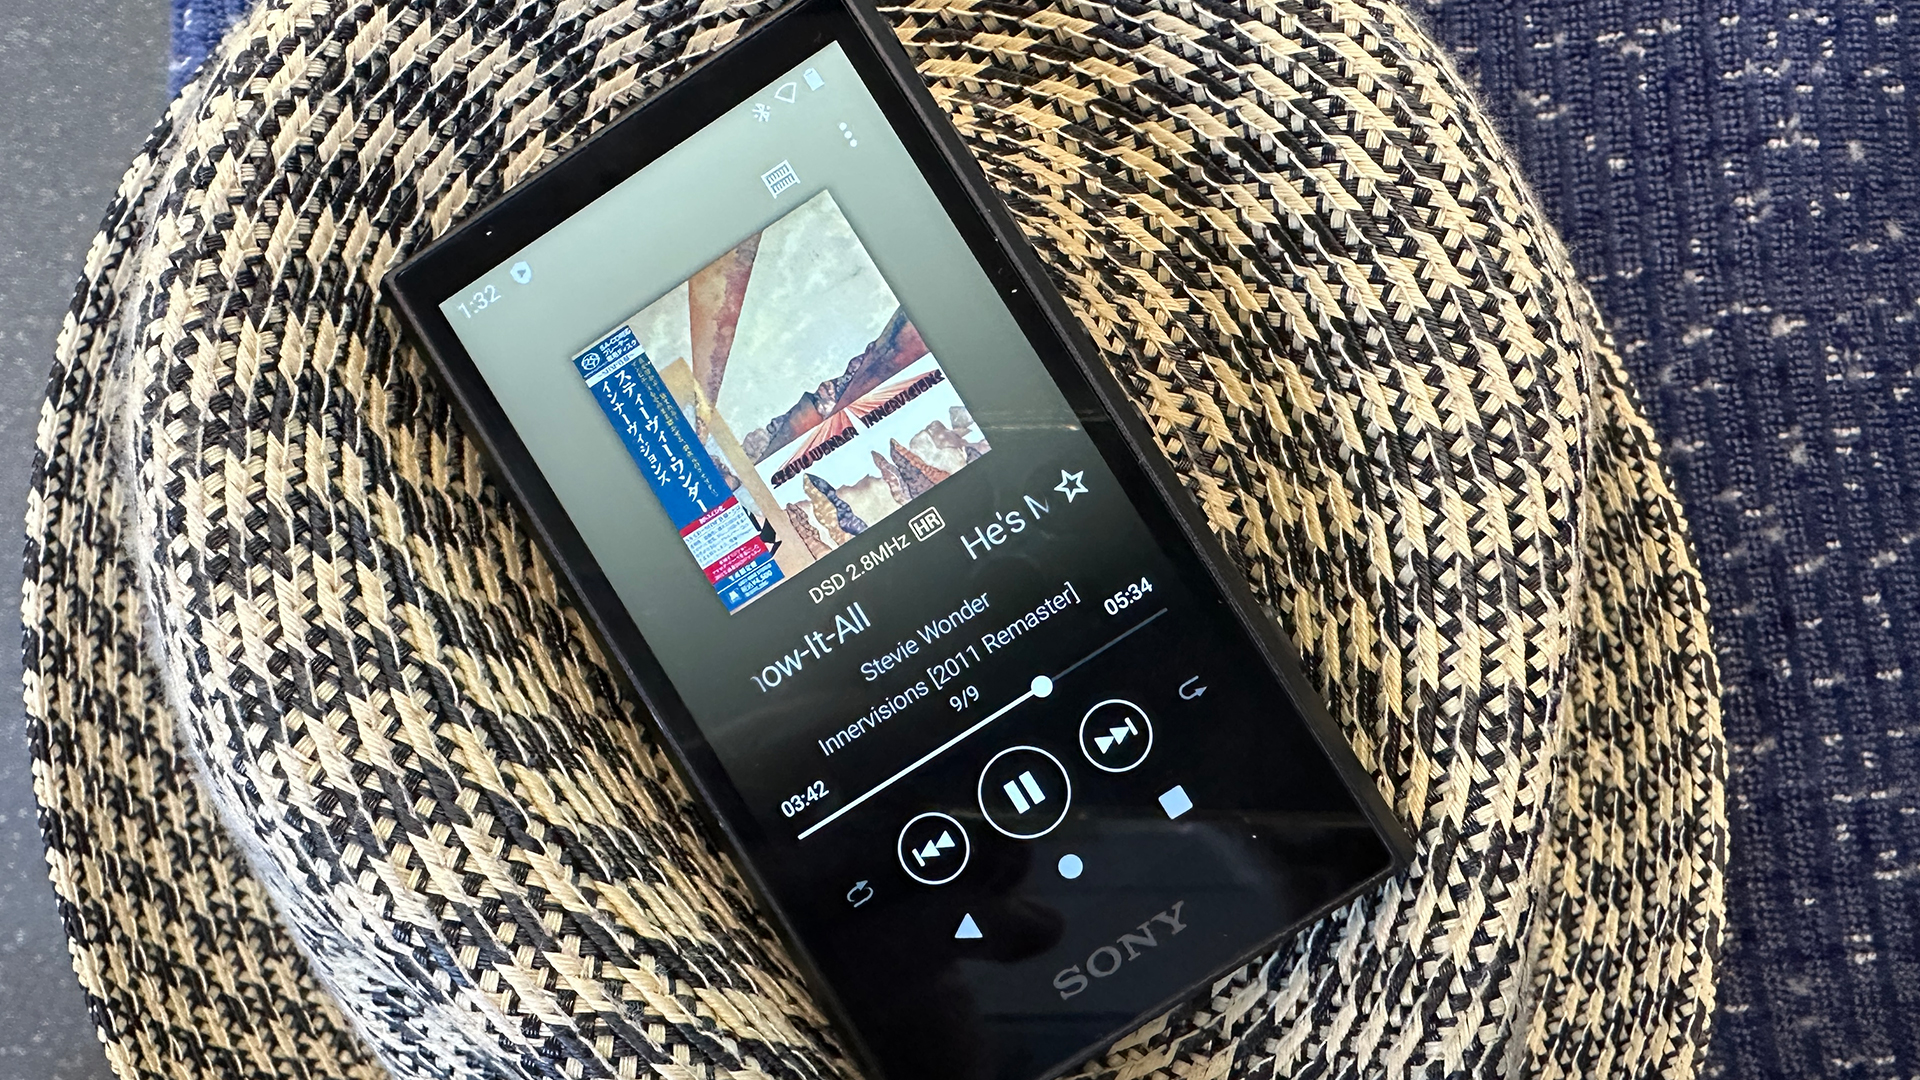 Sony NW-A306 review: a small but mighty digital audio player with